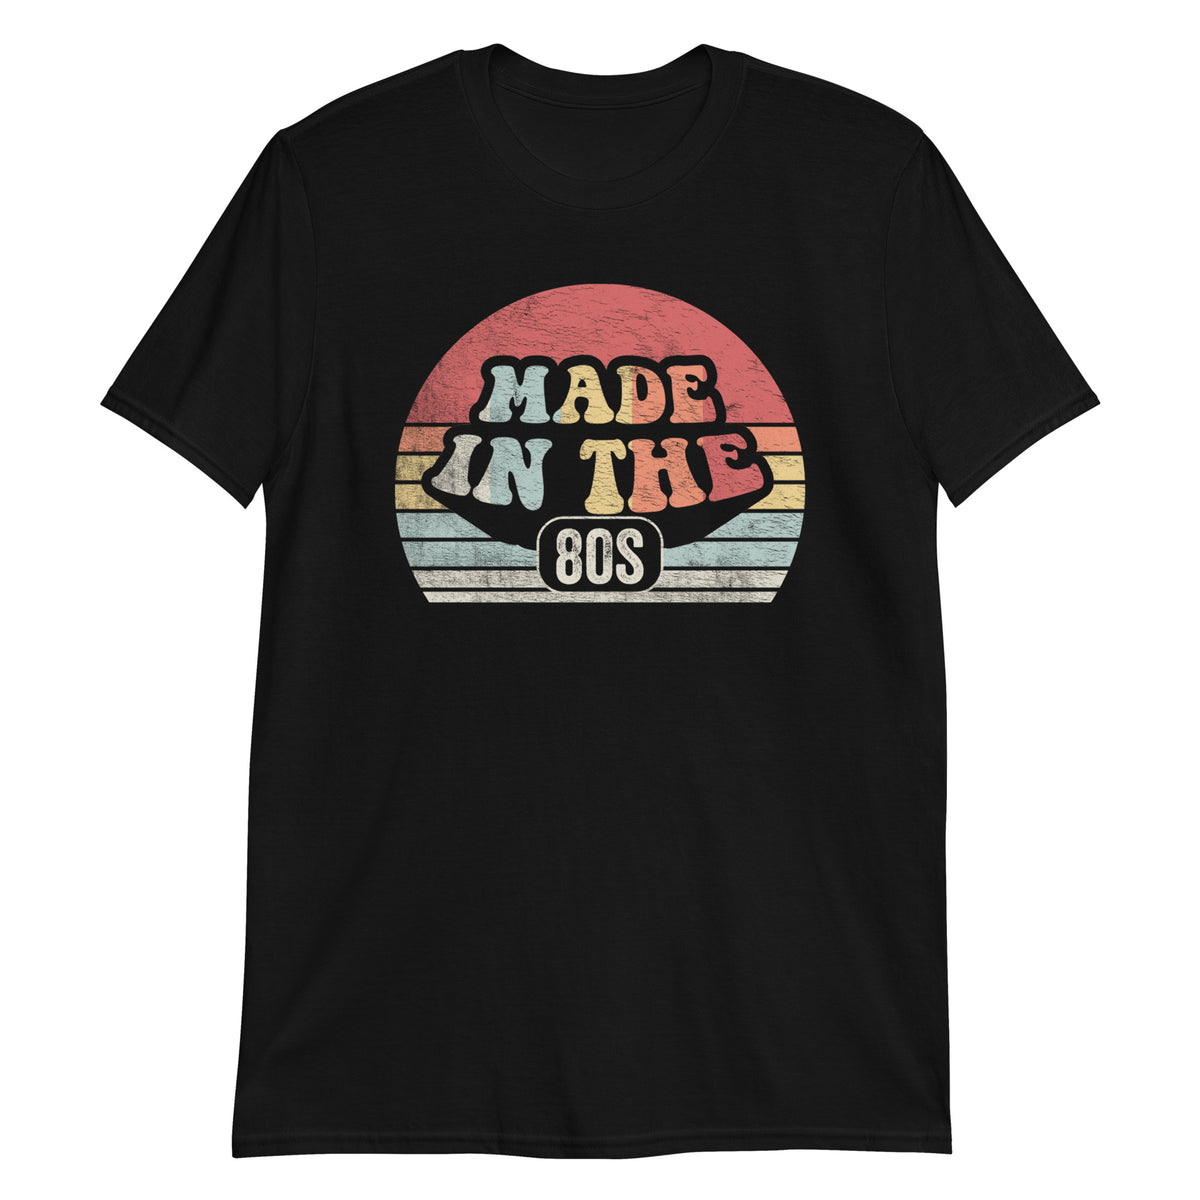 Made in The 80s T-Shirt